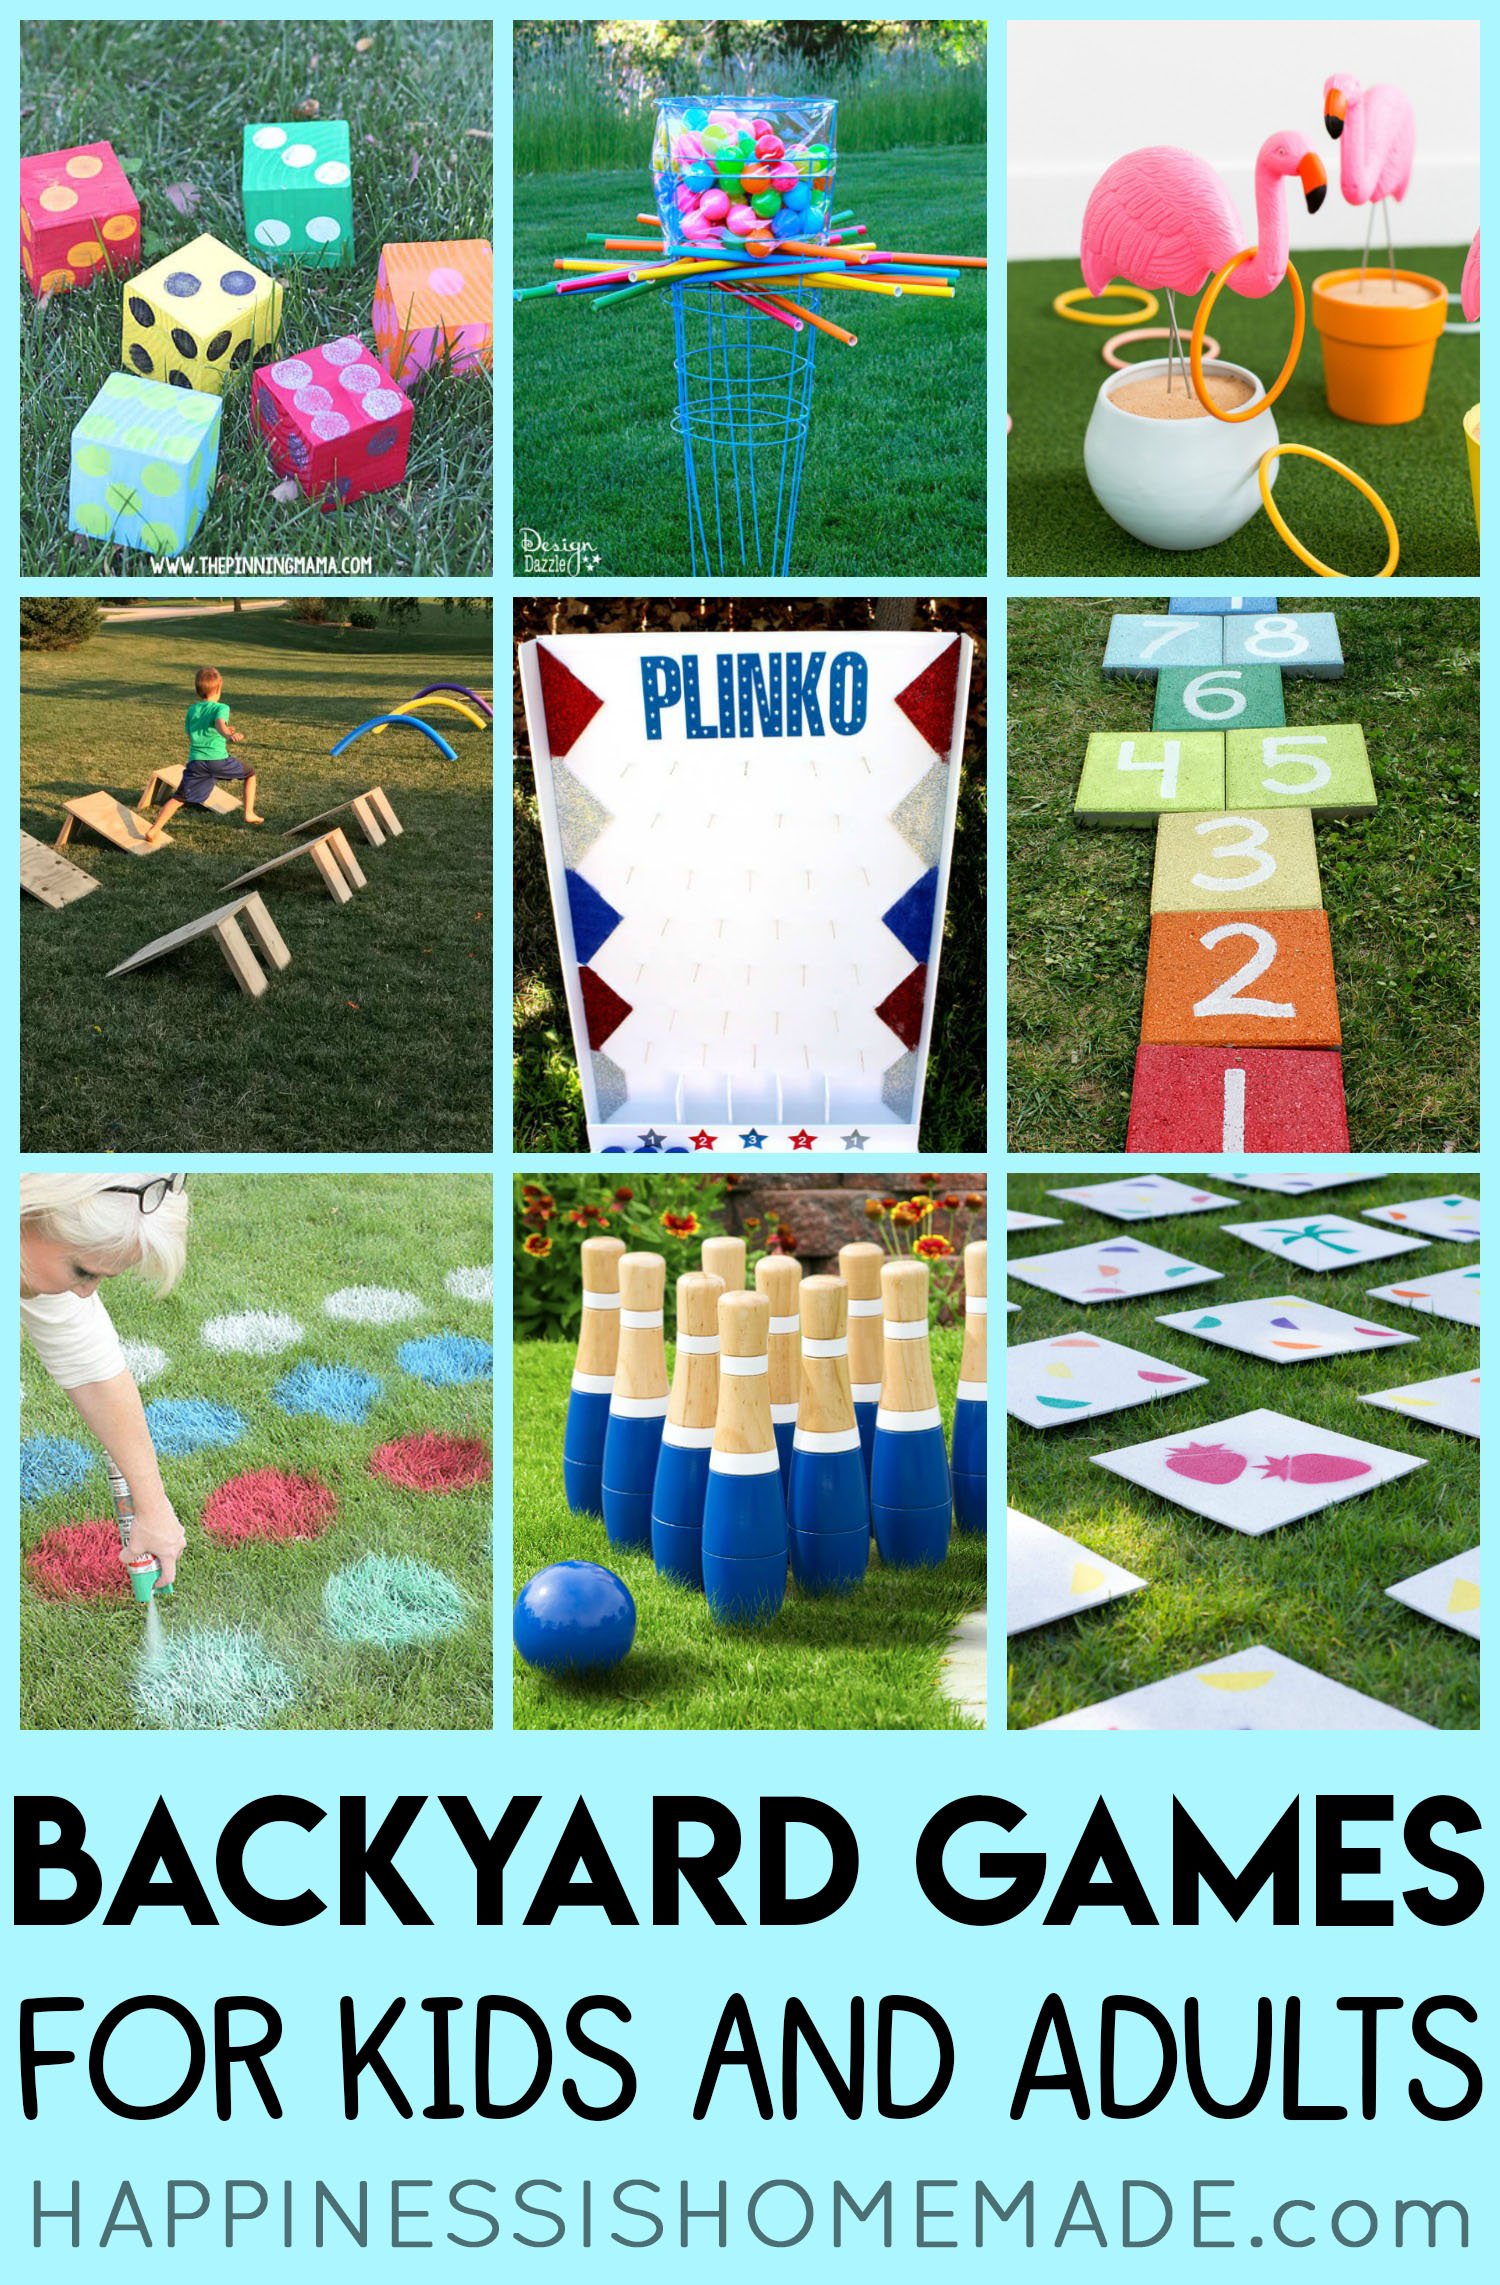 backyard games for kids and adults